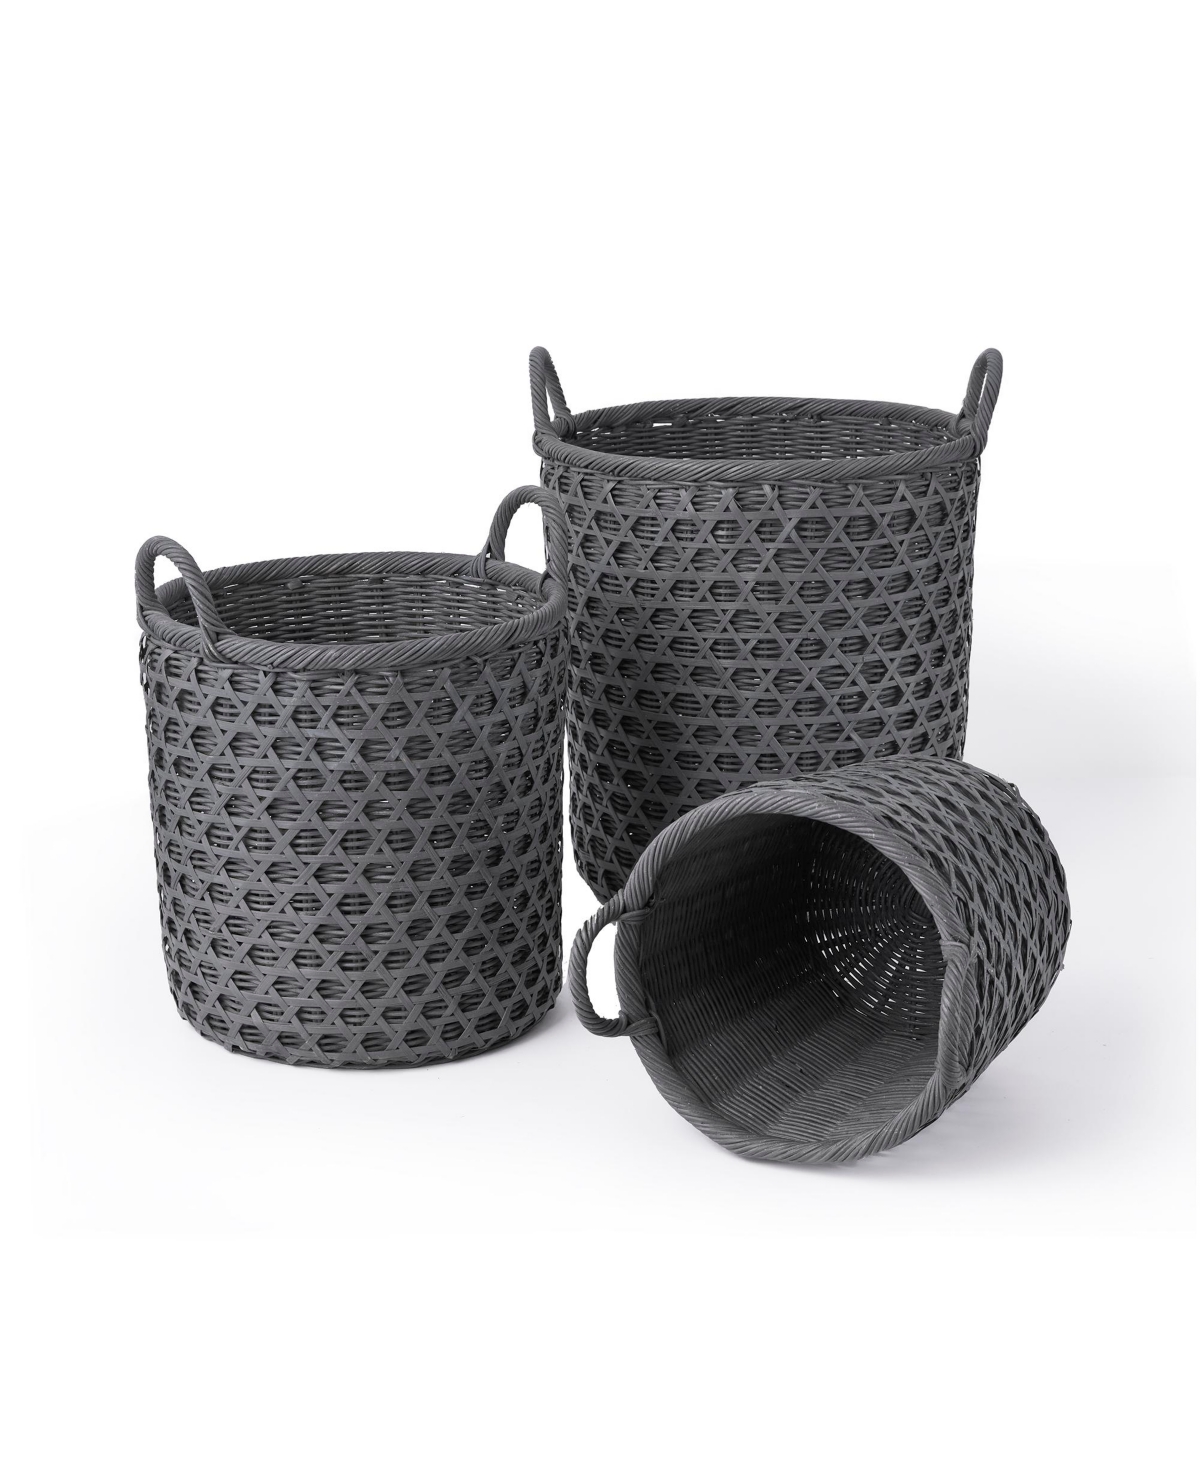 Baum 3 Piece Round Rattan And Bamboo Caning Basket Set With Ear Handles In Gray